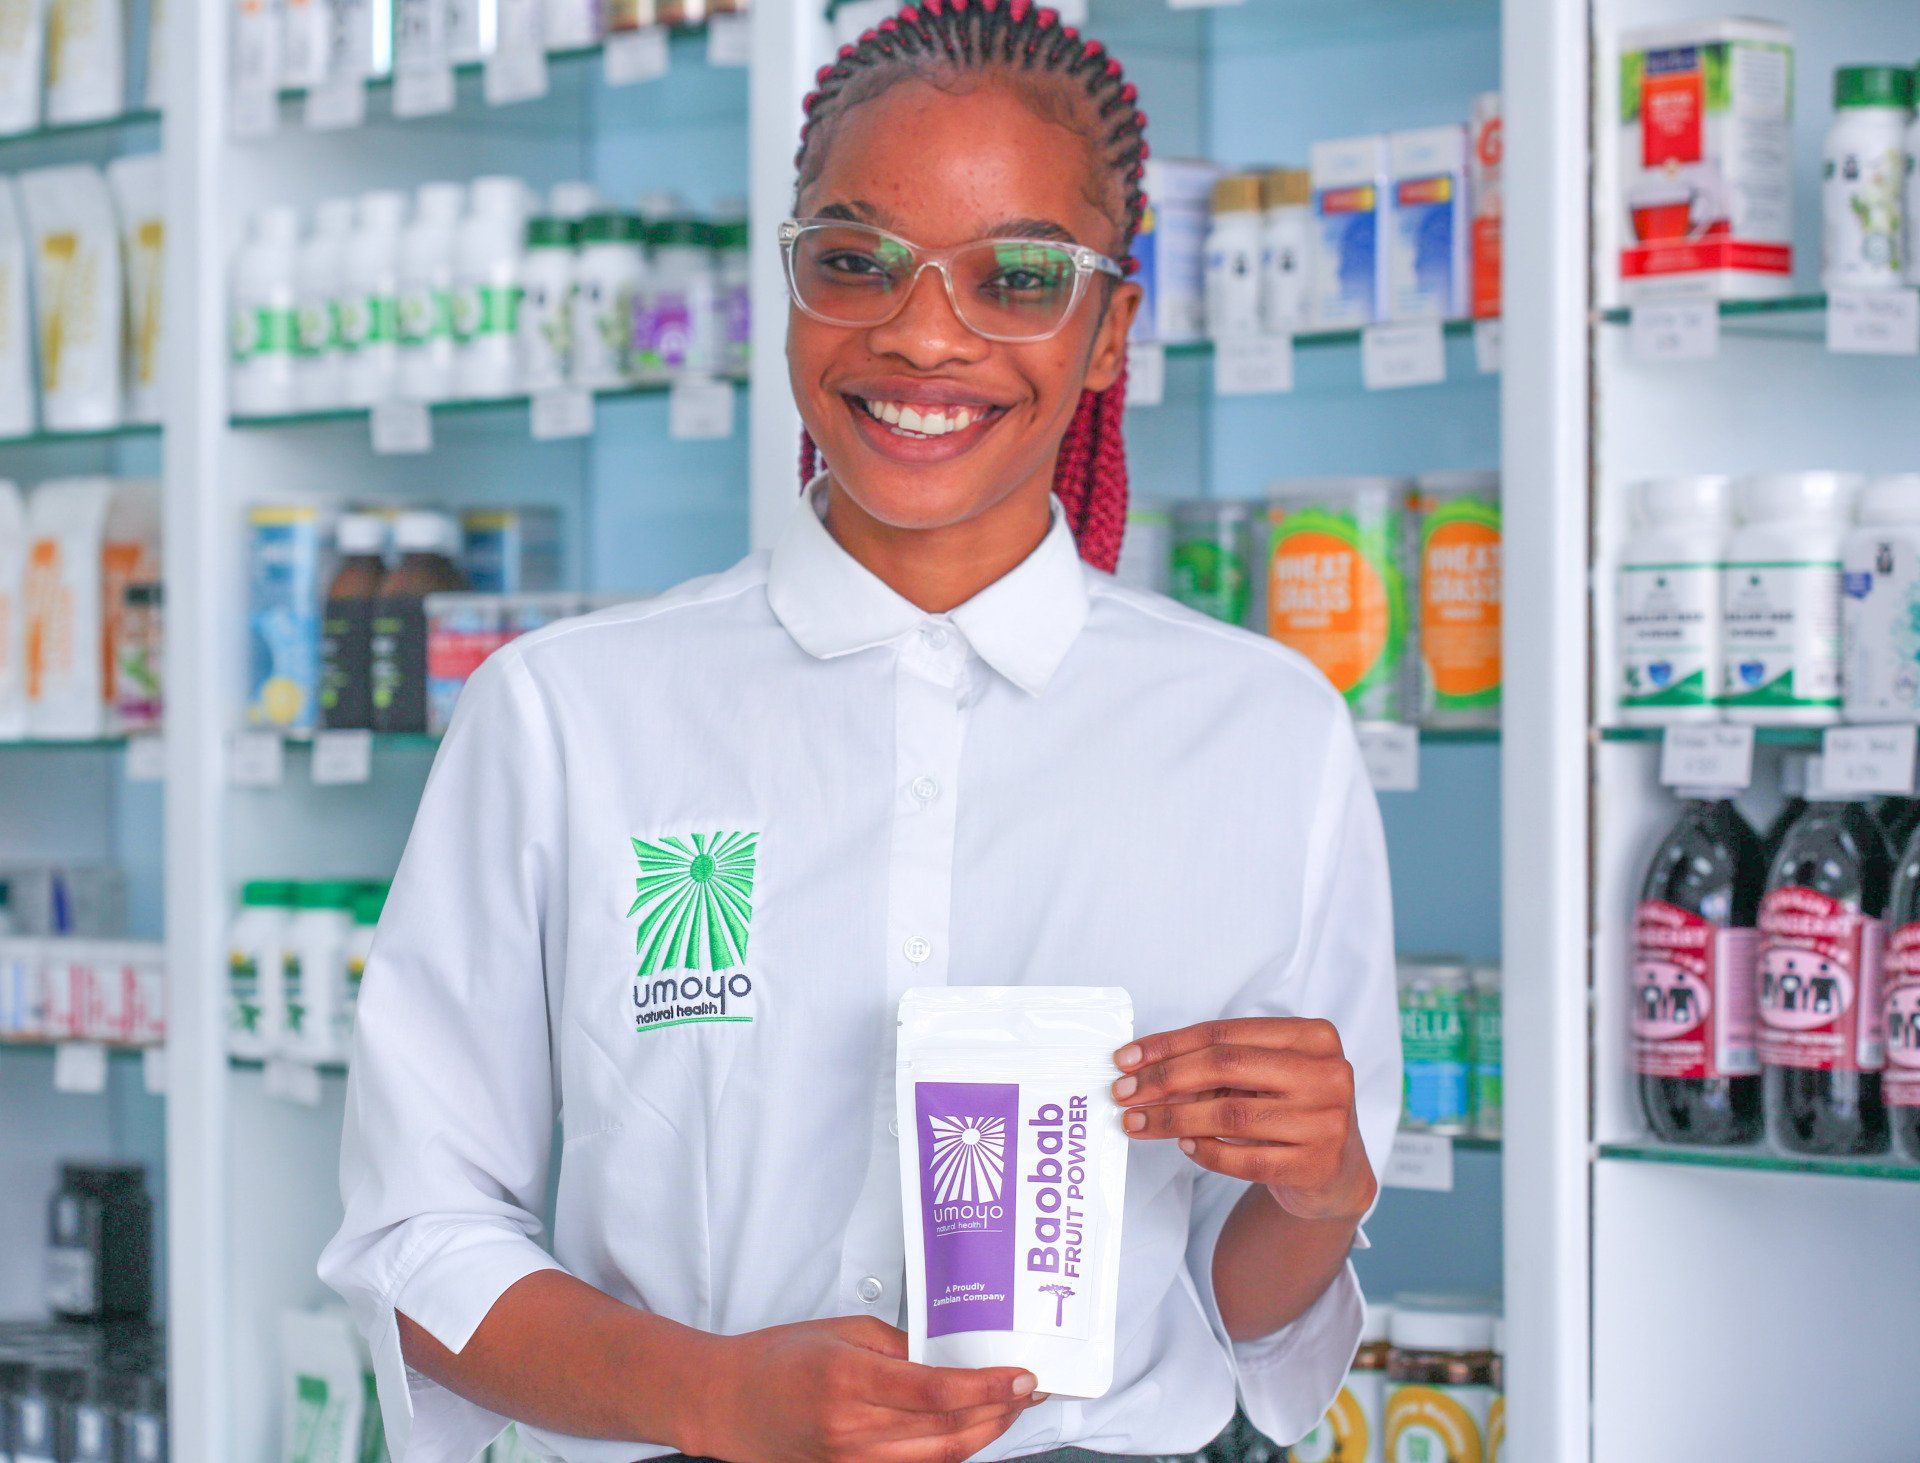 A woman is holding a box of wipes in a pharmacy.